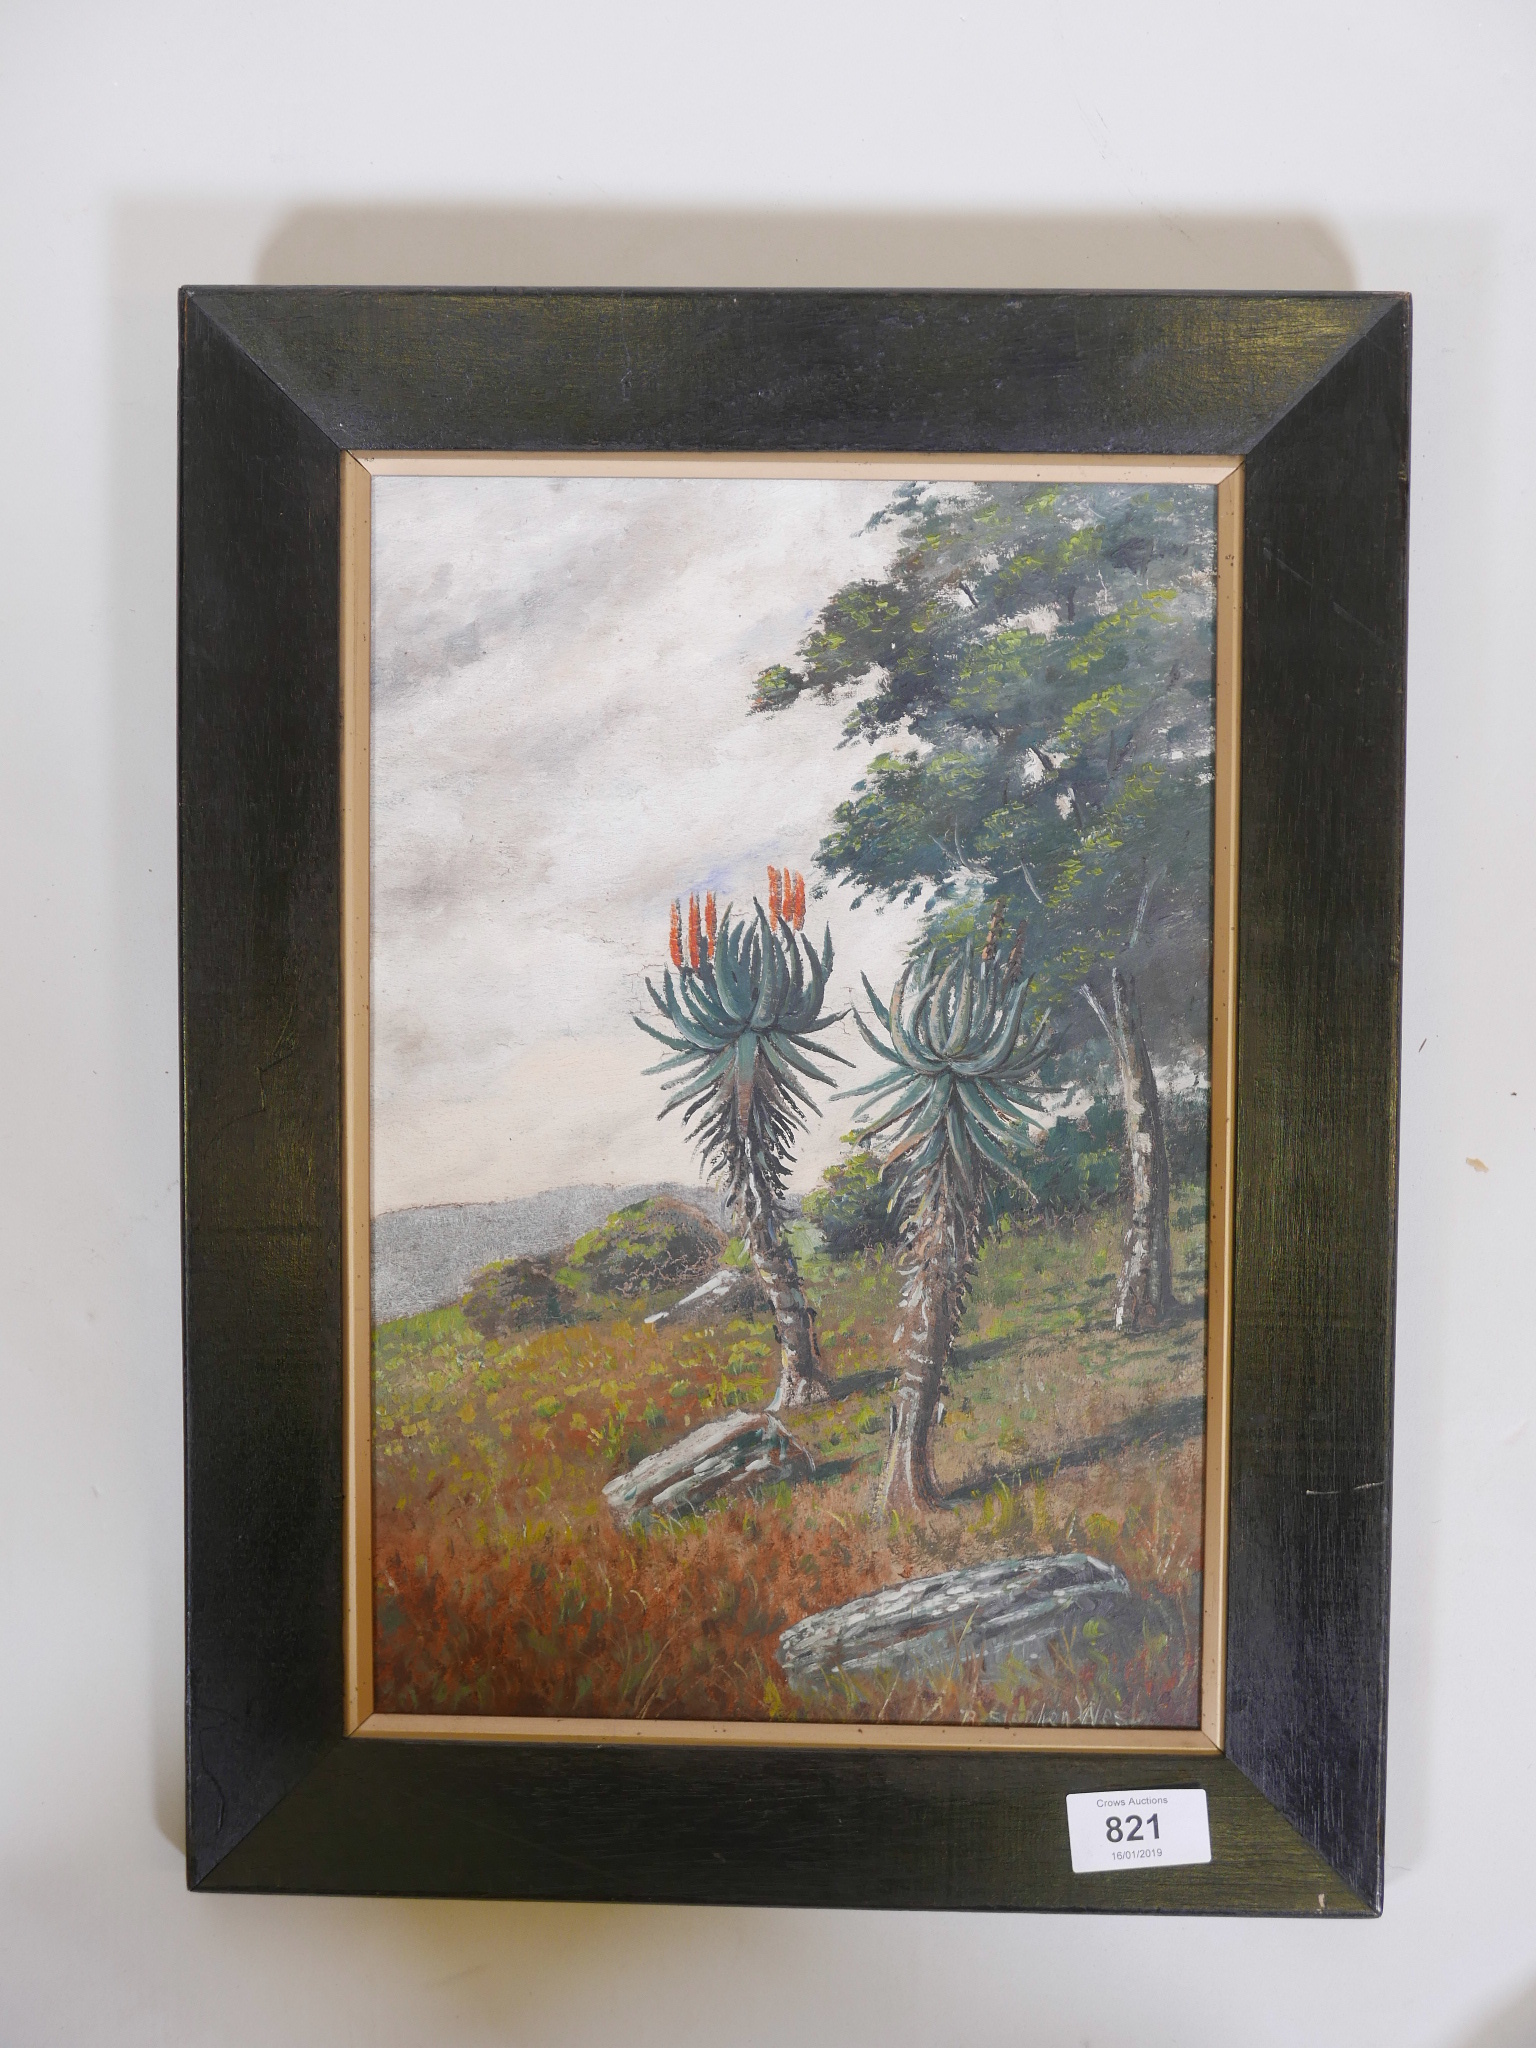 An oil on millboard, palm trees in bloom, signed R. Stephen West, early C20th, 14" x 10" - Image 2 of 3